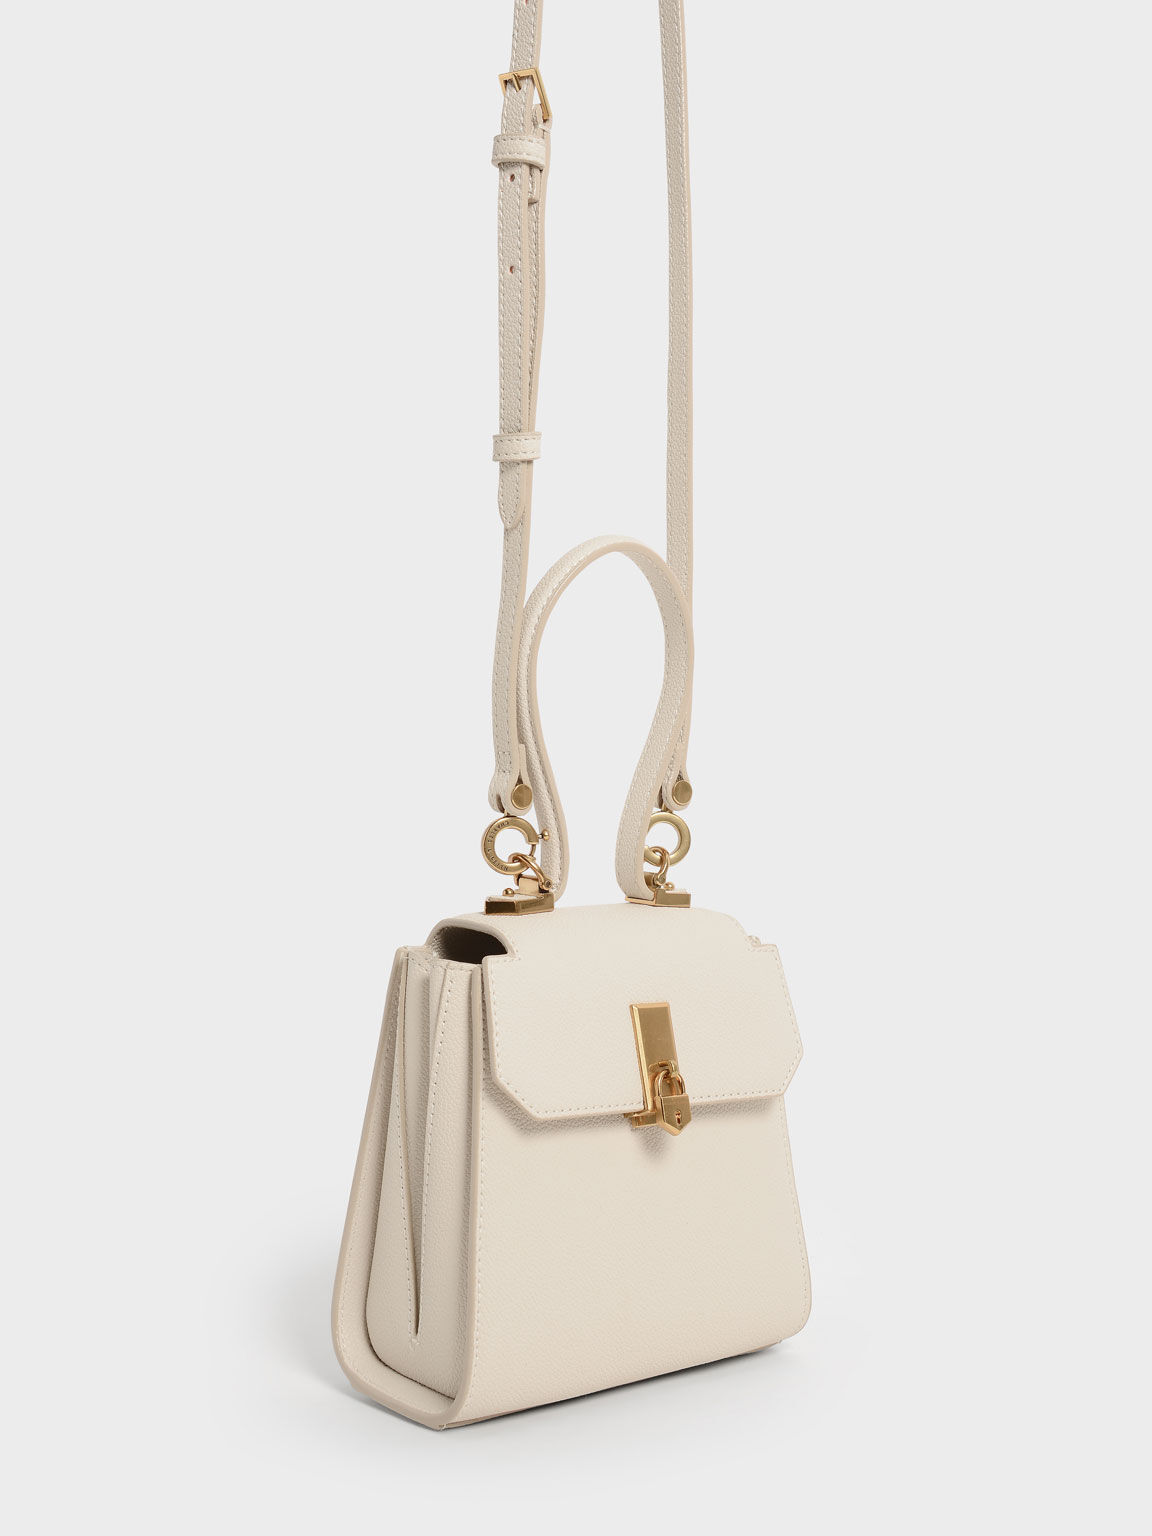 Shop Women’s Bags Online - CHARLES & KEITH FR